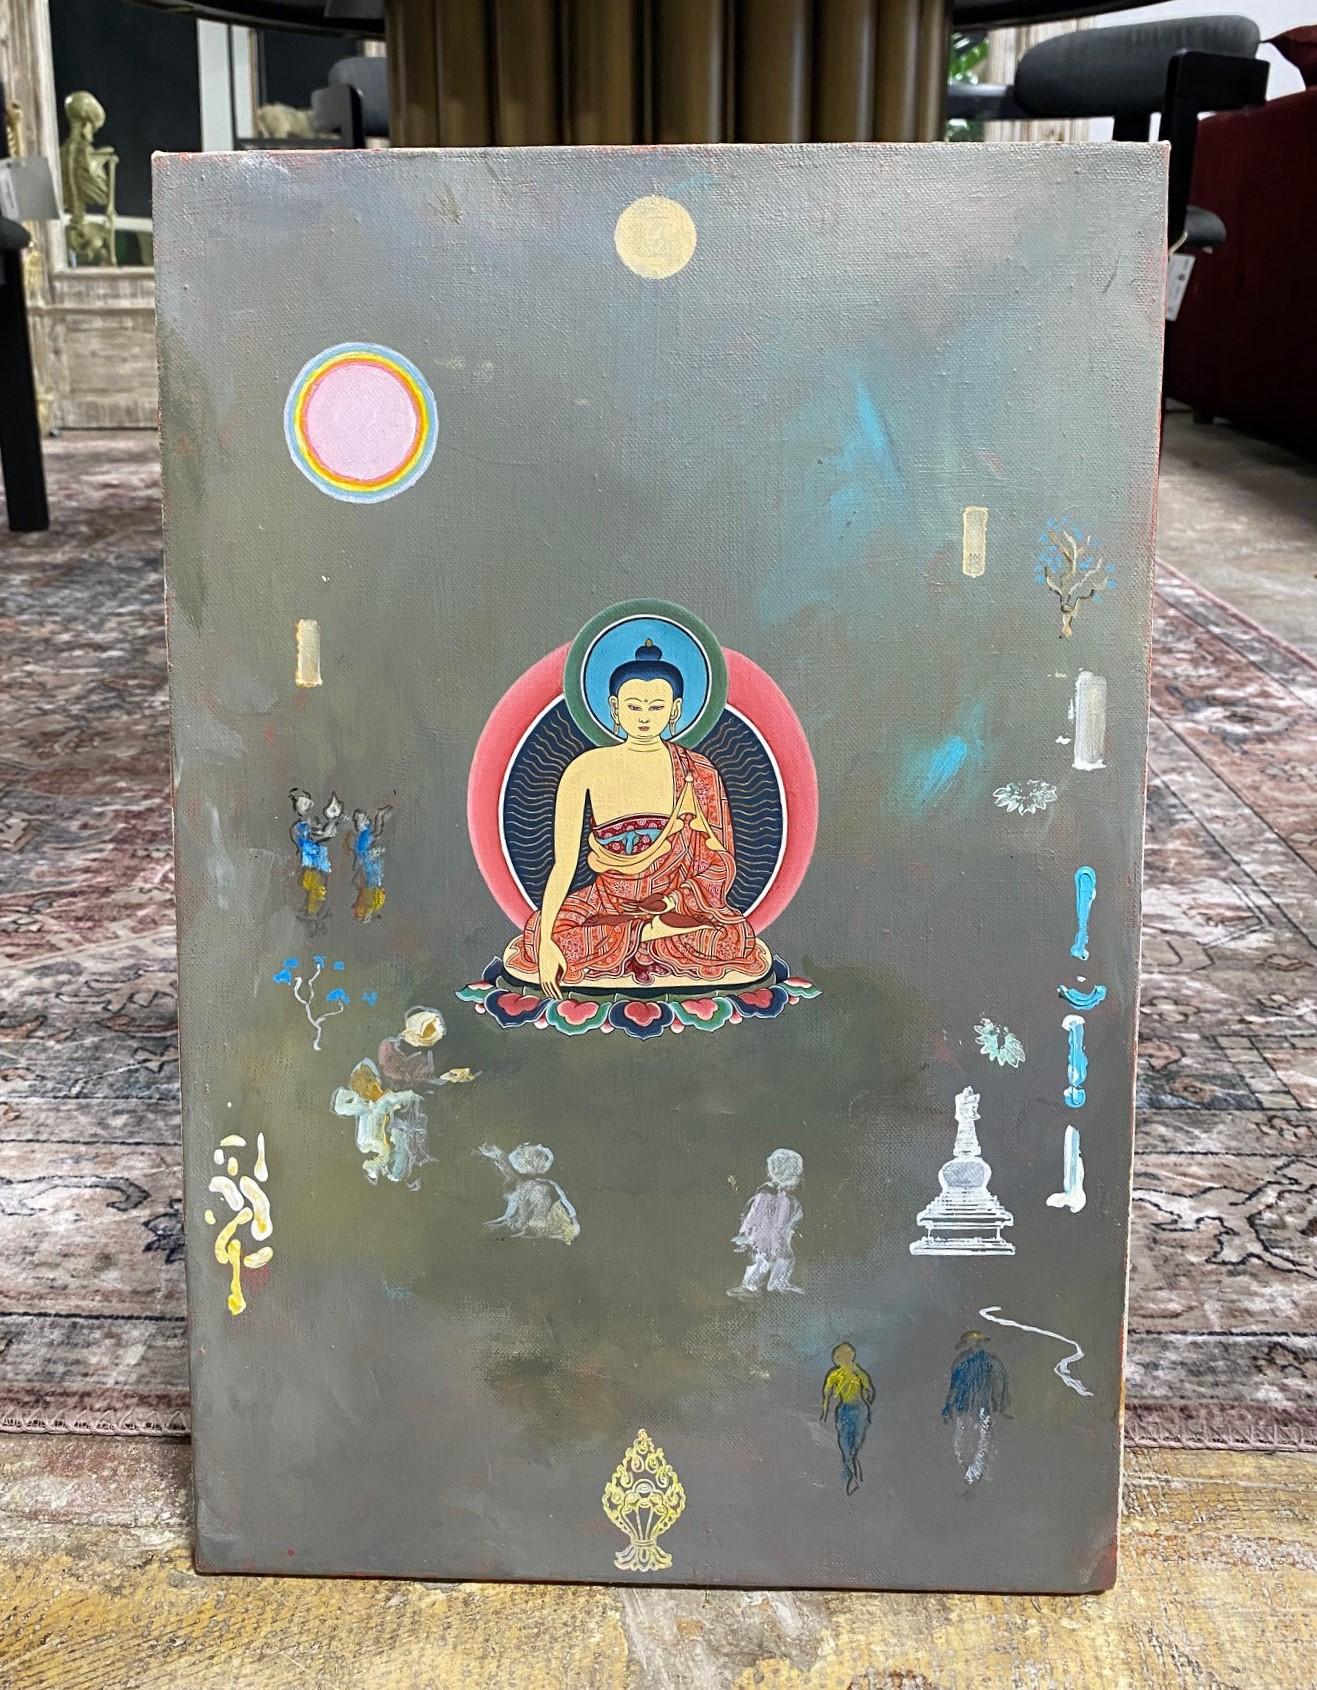 A beautiful original painting of the Buddha by Australian artist Tim Johnson in collaboration with artist Daniel Bogunovic. Johnson was born in Sydney in 1947. His artistic career began in the 1960s. His works are often infused with spiritual